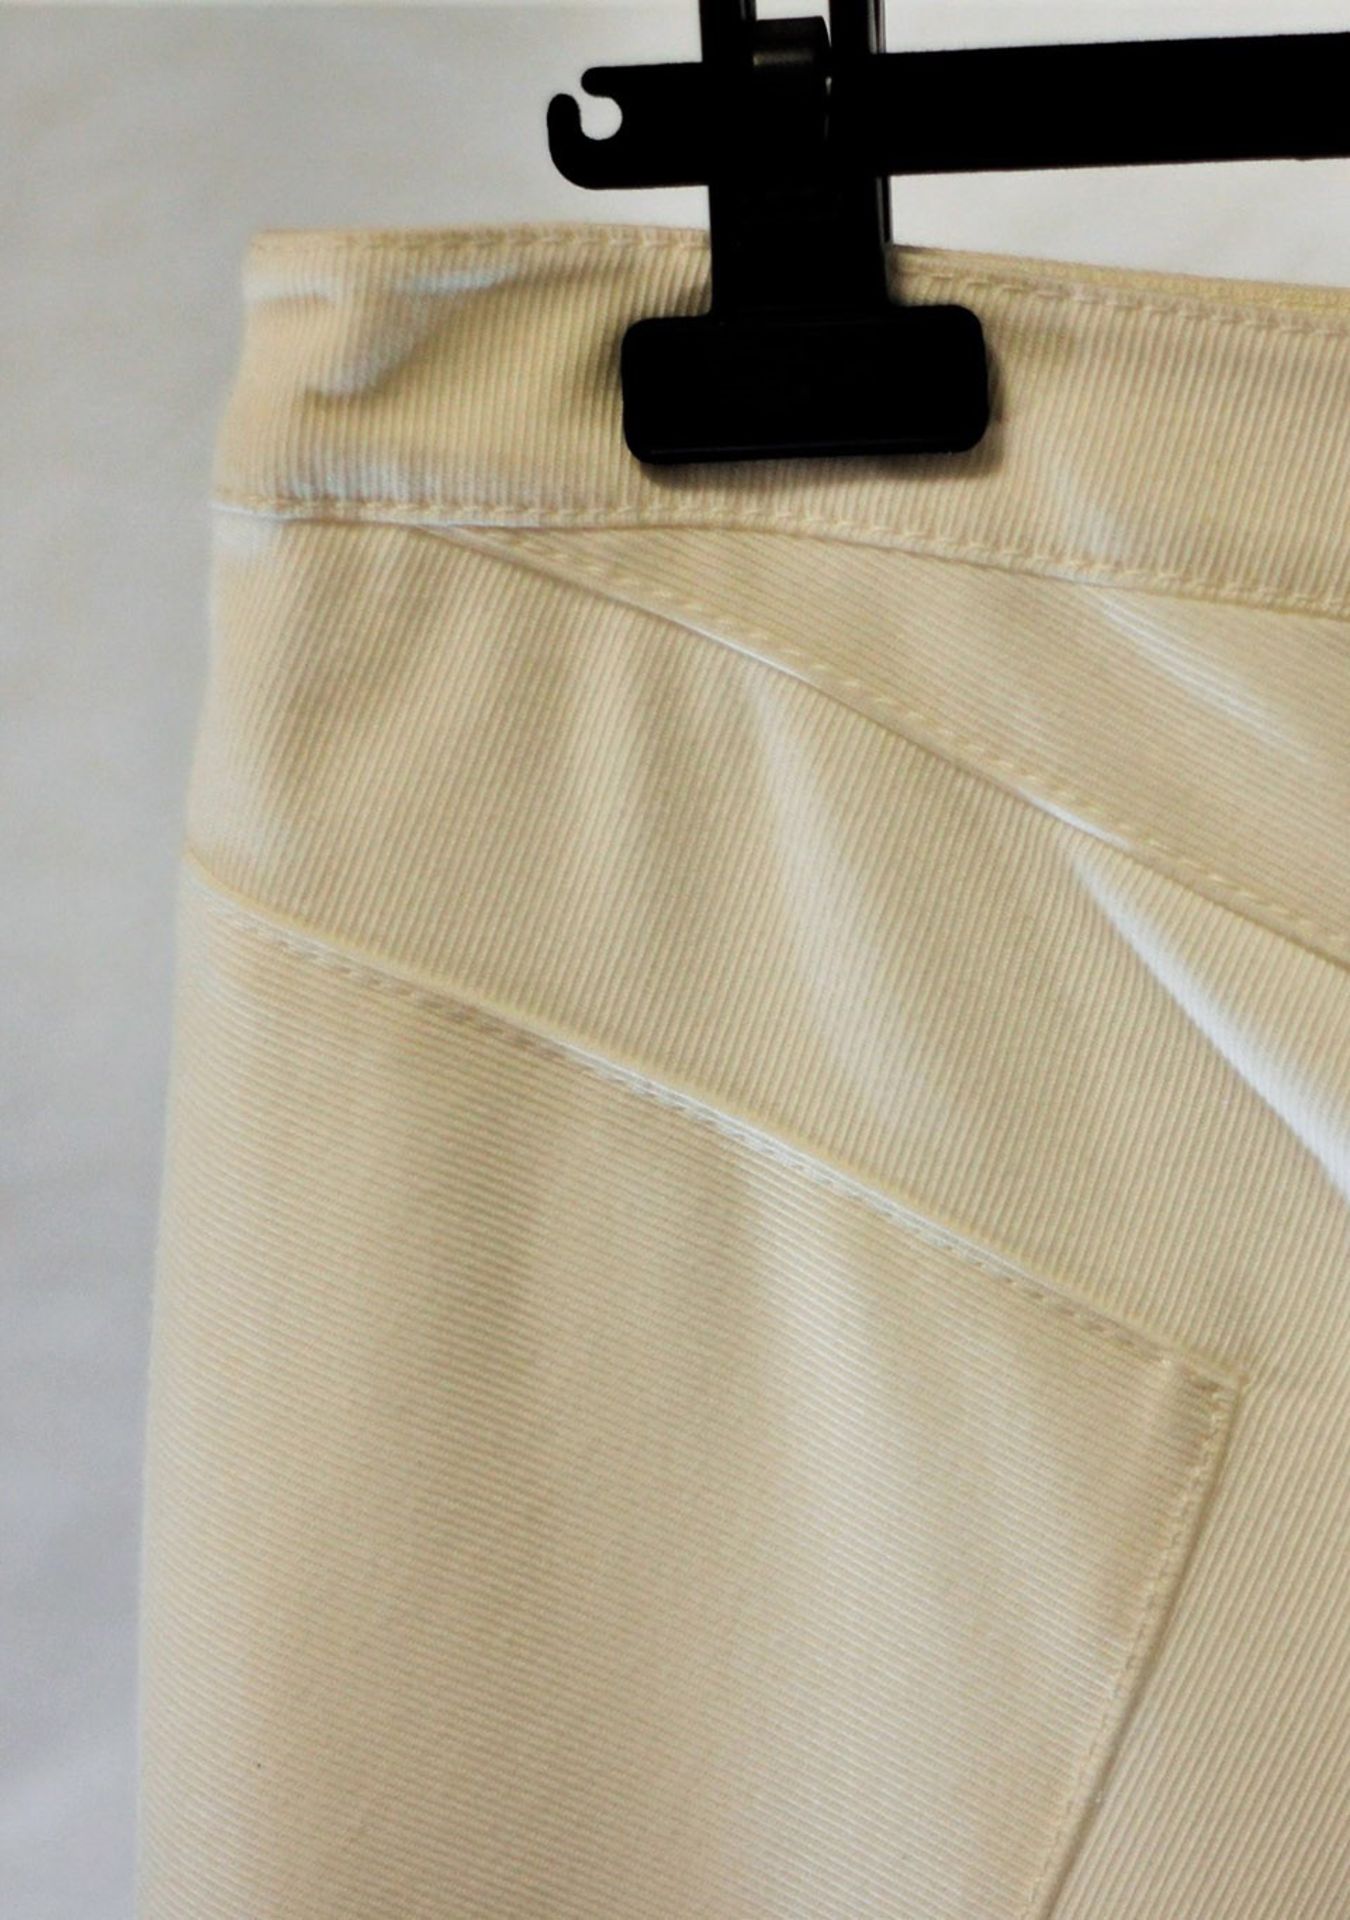 1 x Valentino Cream Trousers - Size: 10 - Material: 98% Cotton, 2% Elastane. Lining 100% Polyester - - Image 4 of 5